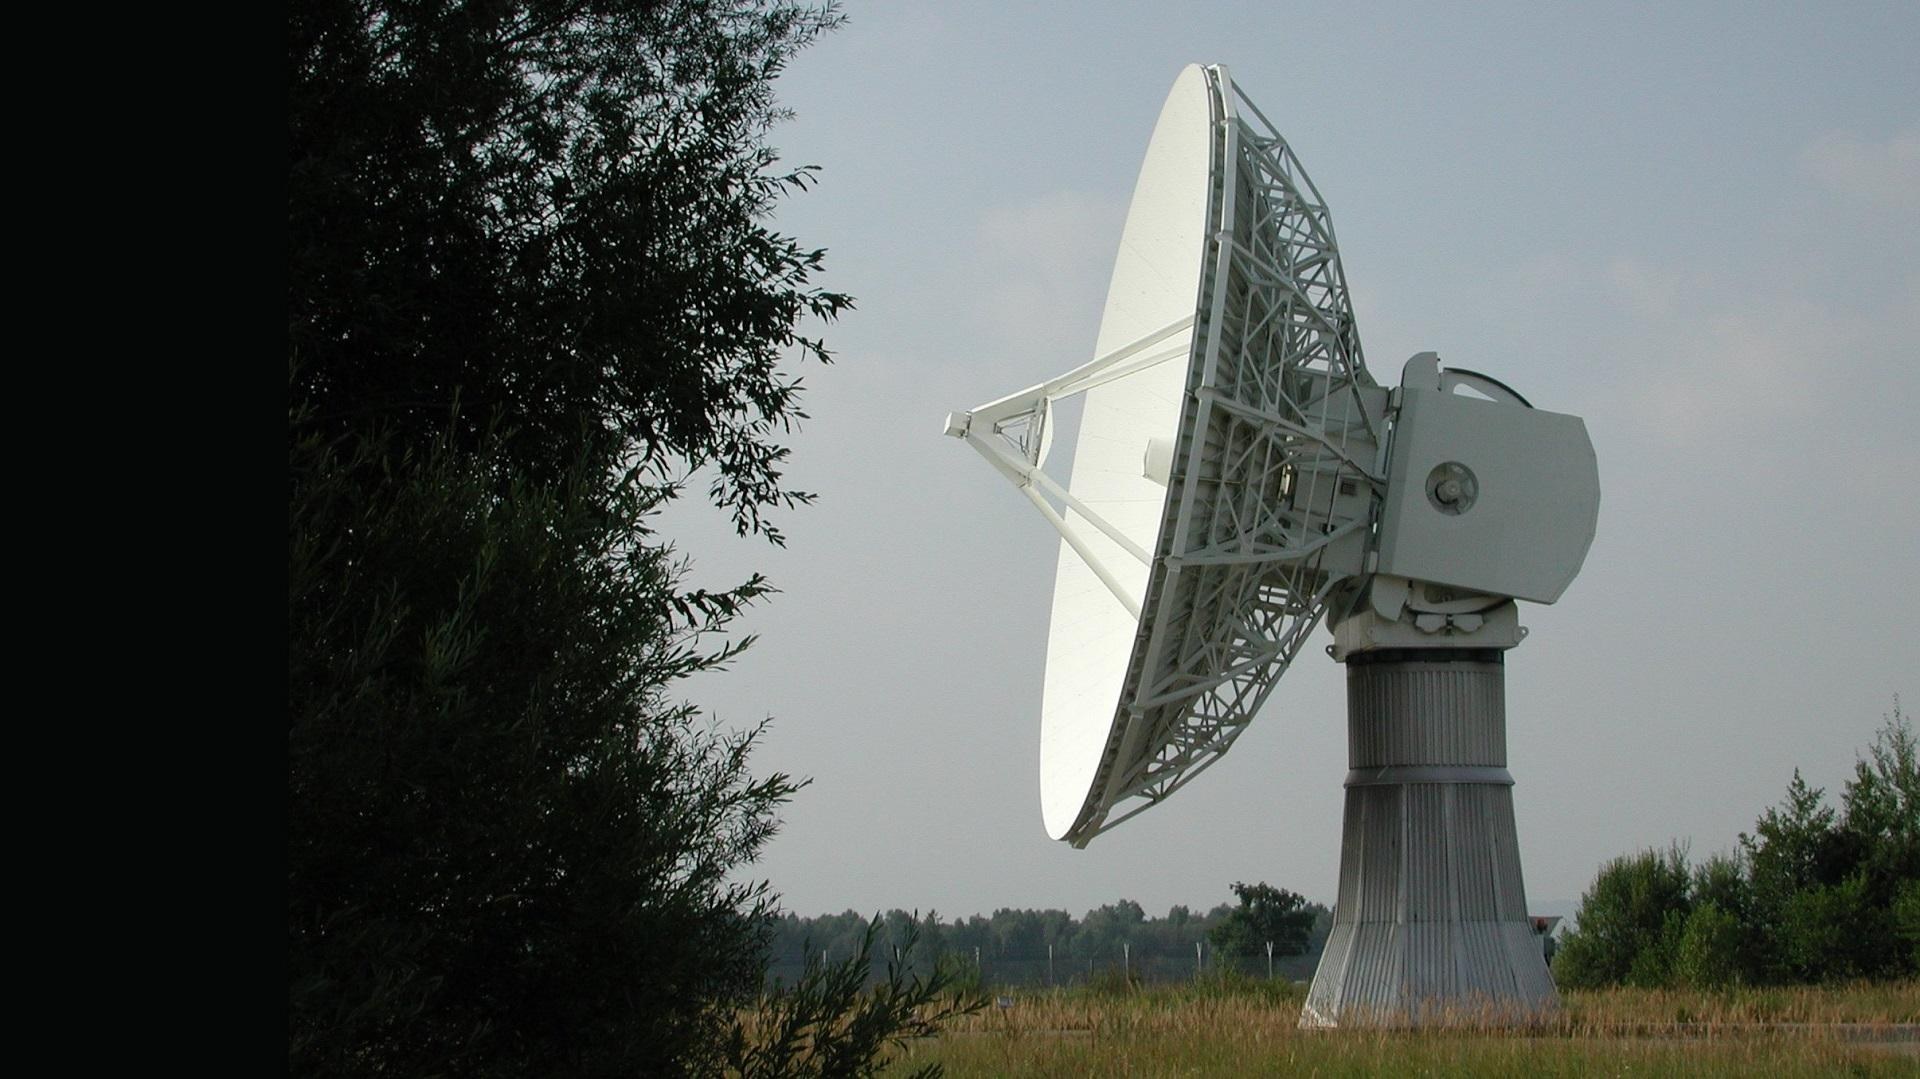 One of the two 15-metre S-band antennas